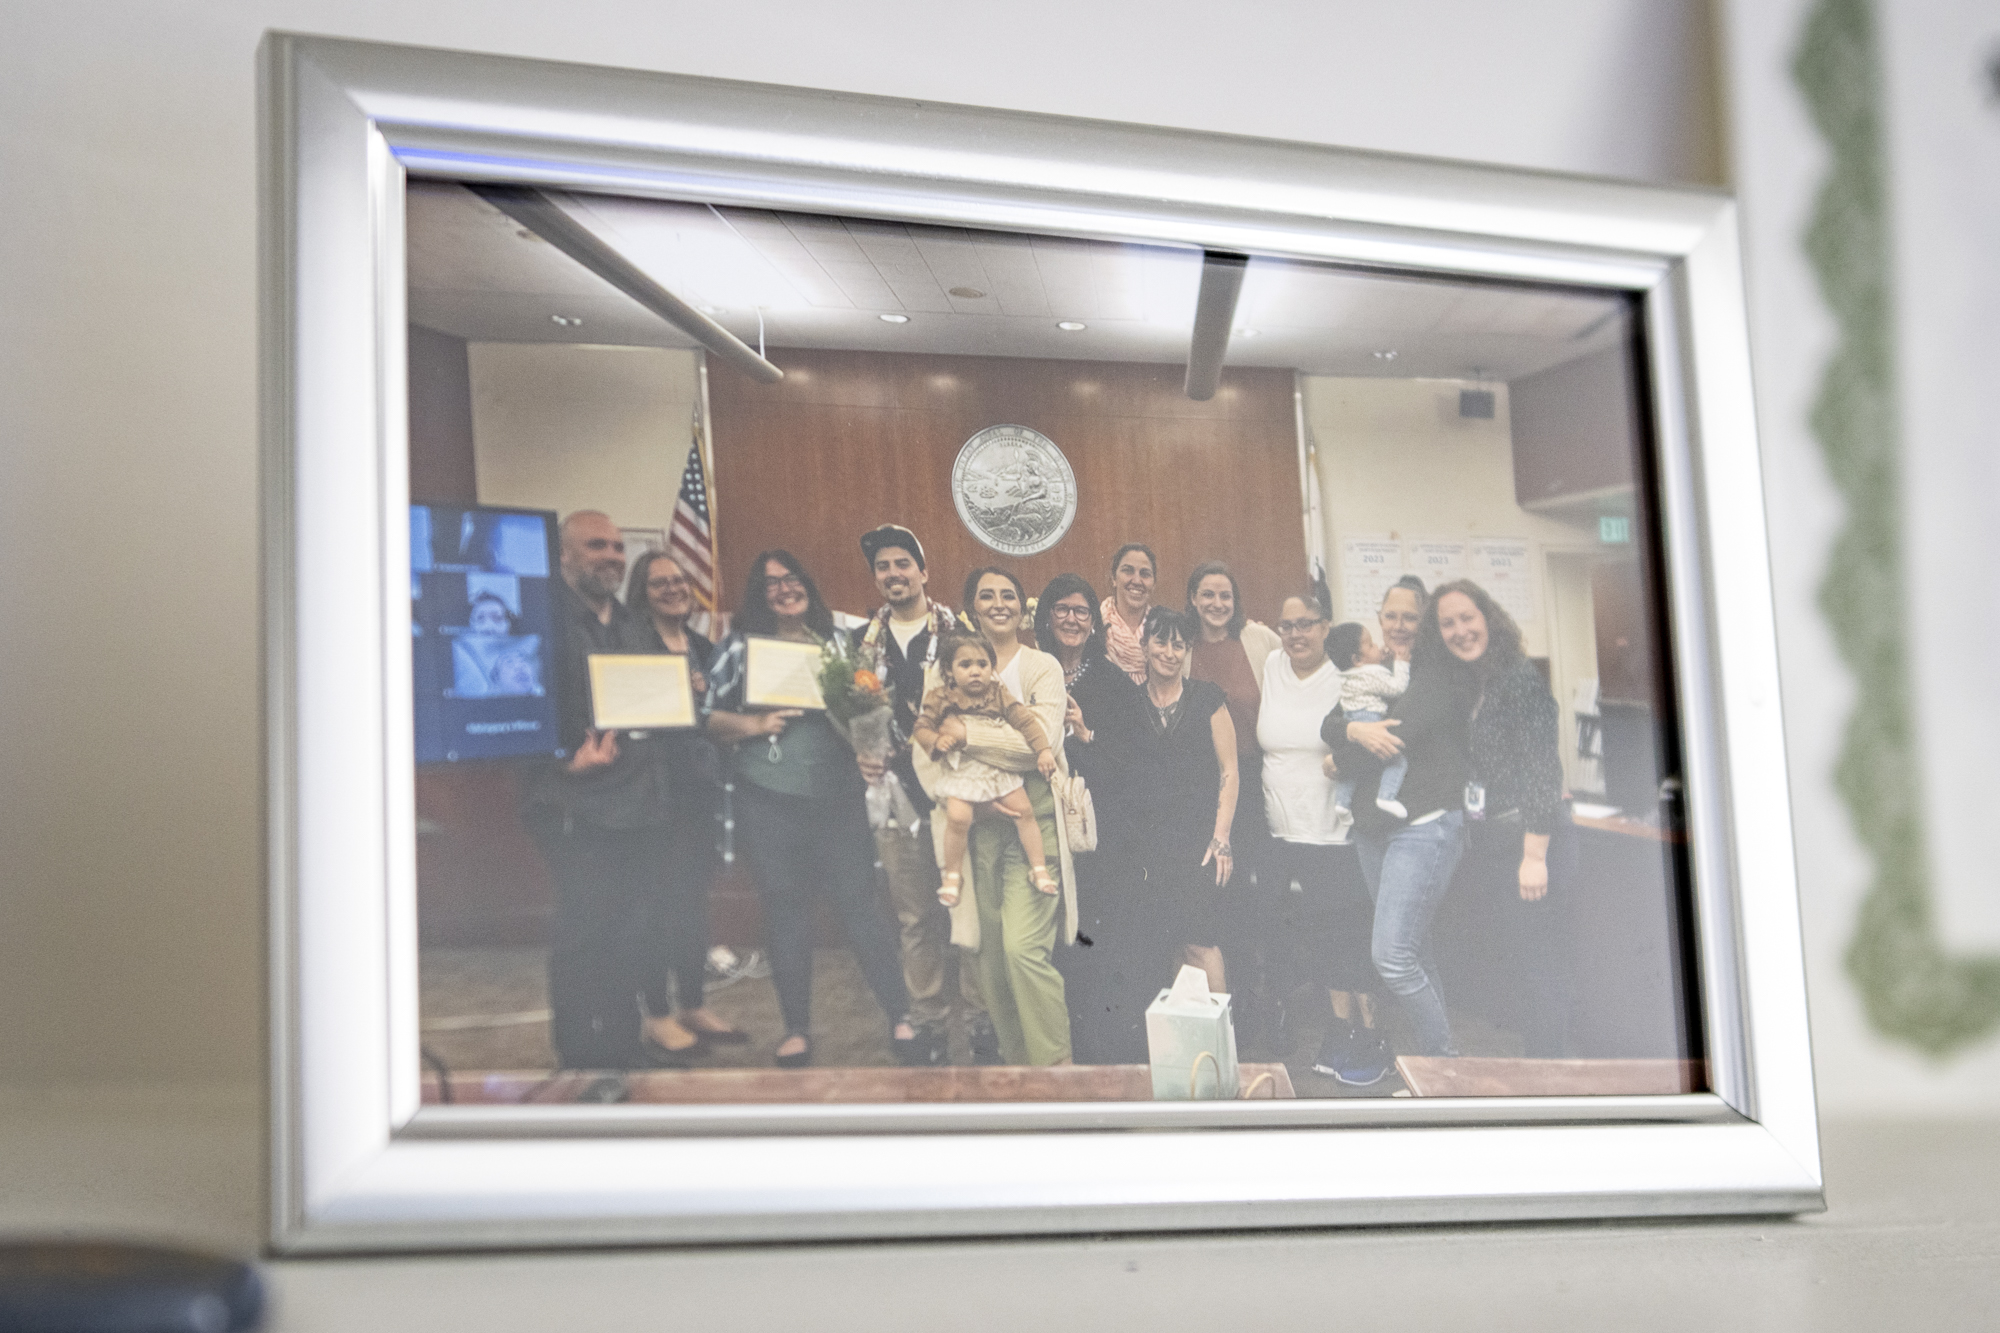 A framed photo of a group of people in an official looking setting.